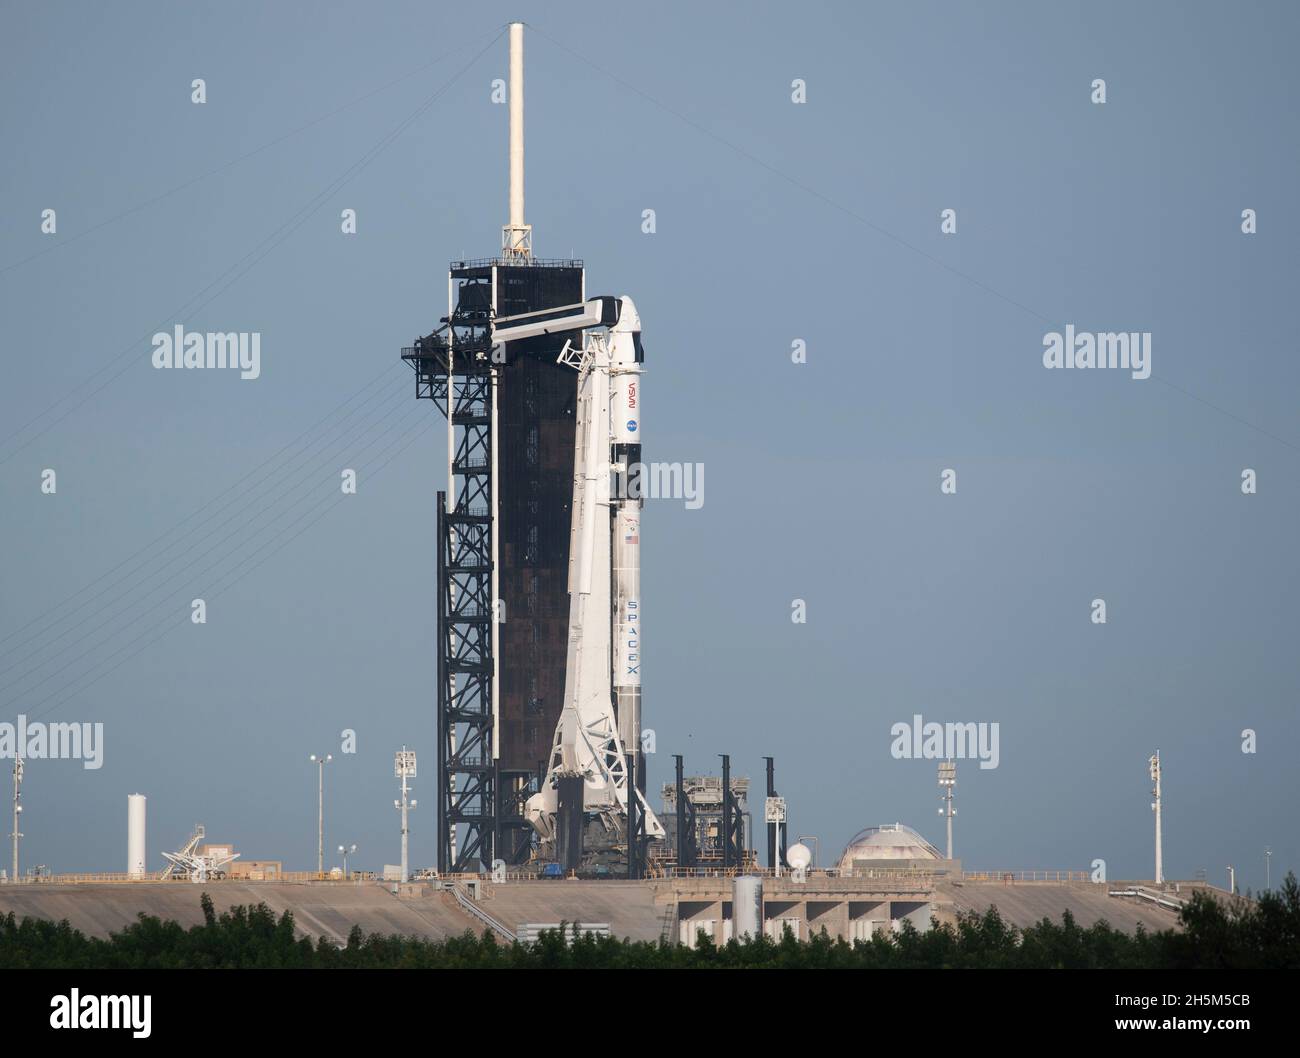 Cape Canaveral, United States of America. 10 November, 2021. A SpaceX Falcon 9 rocket with the Crew Dragon spacecraft for the NASA SpaceX Crew-3 mission to the International Space Station continues preparations on Launch Complex 39A at the Kennedy Space Center early morning November 10, 2021 in Cape Canaveral, Florida. The crew of NASA astronauts Raja Chari, Tom Marshburn, Kayla Barron, and European Space Agency astronaut Matthias Maurer are expected to launch later in the day after several delays. Credit: Joel Kowsky/NASA/Alamy Live News Stock Photo